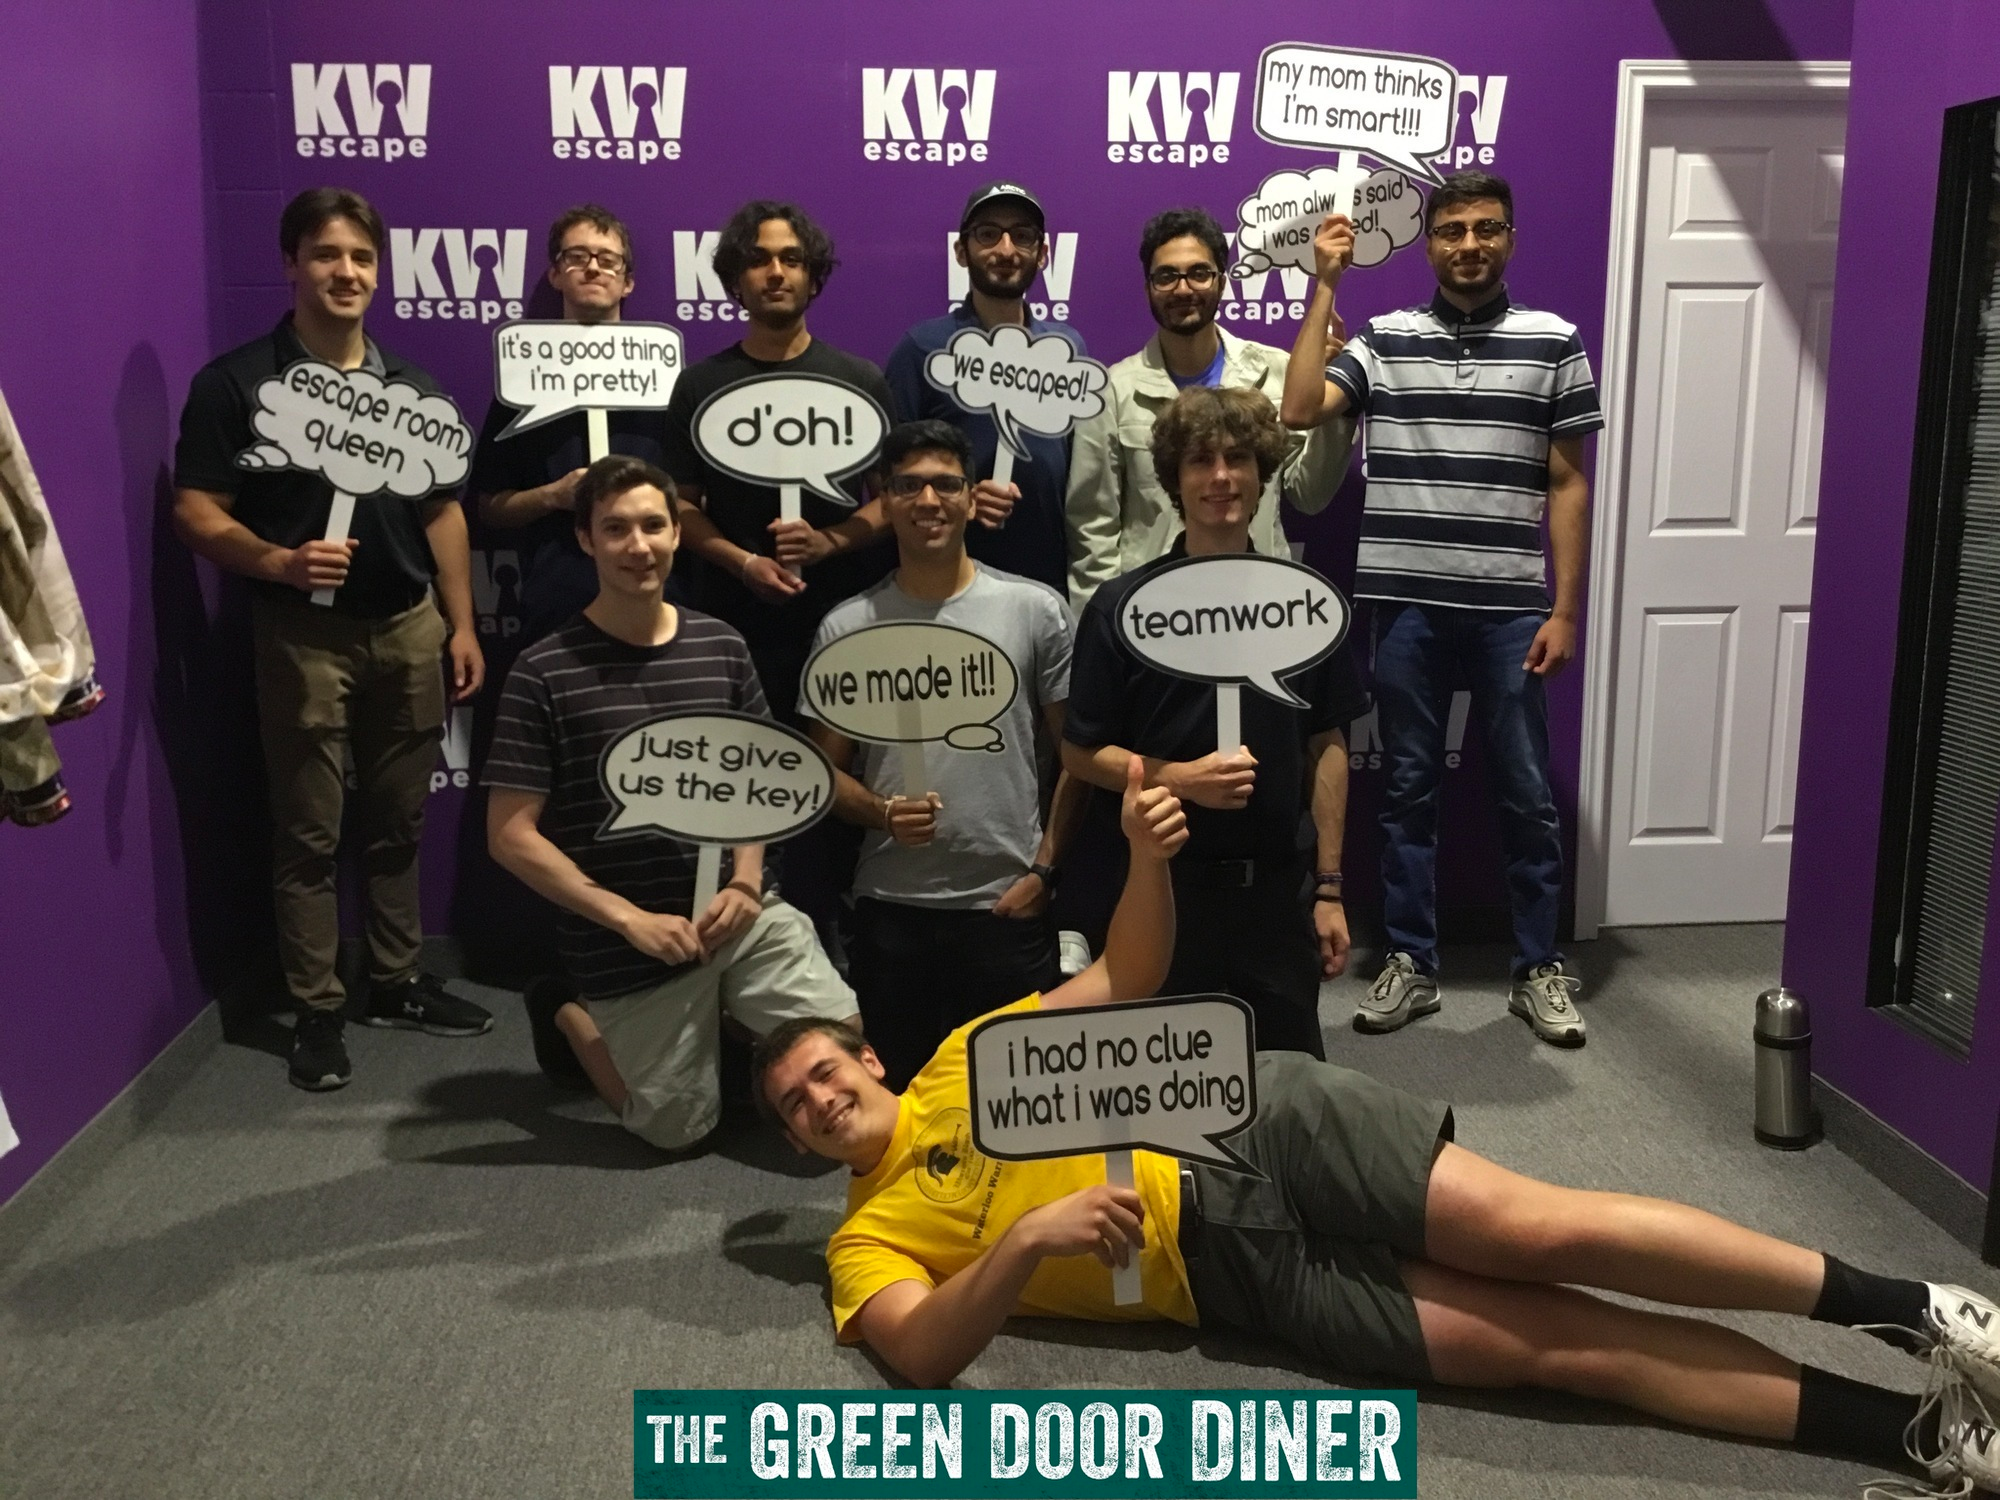 Arctic Wolf co-op students posing for a group photo after completing an escape room during a work social event.